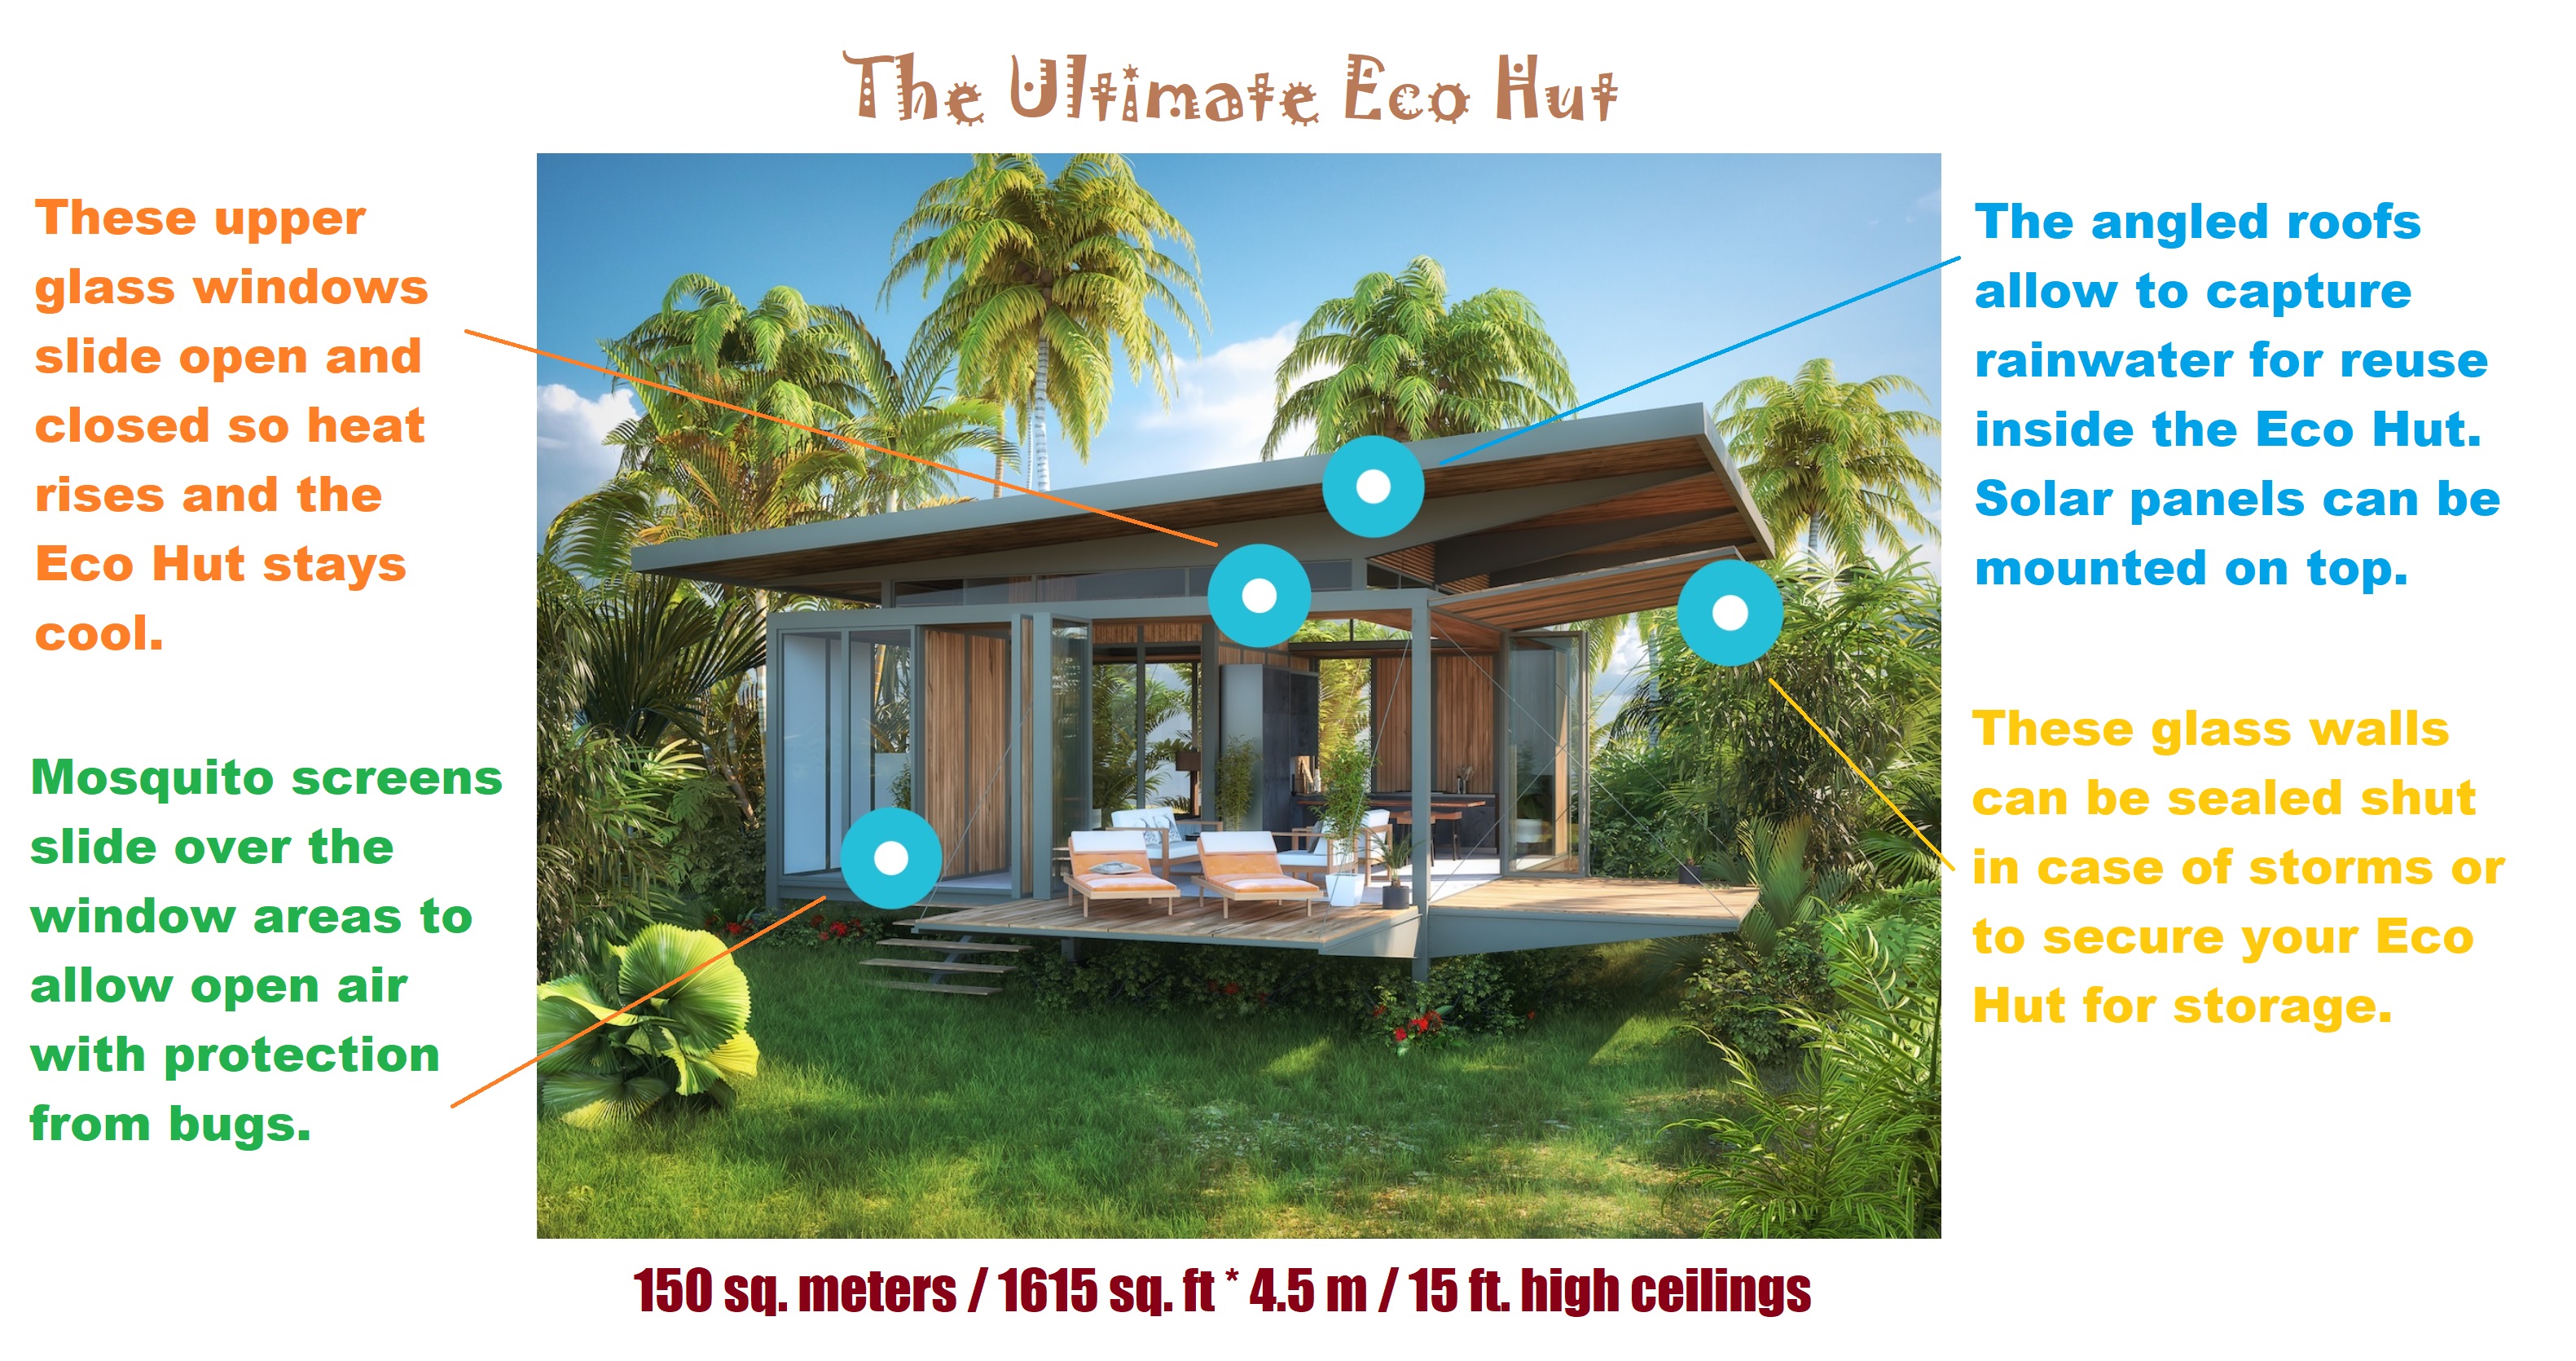 The Eco Hut features several features to make sustainable living in the tropics possible.